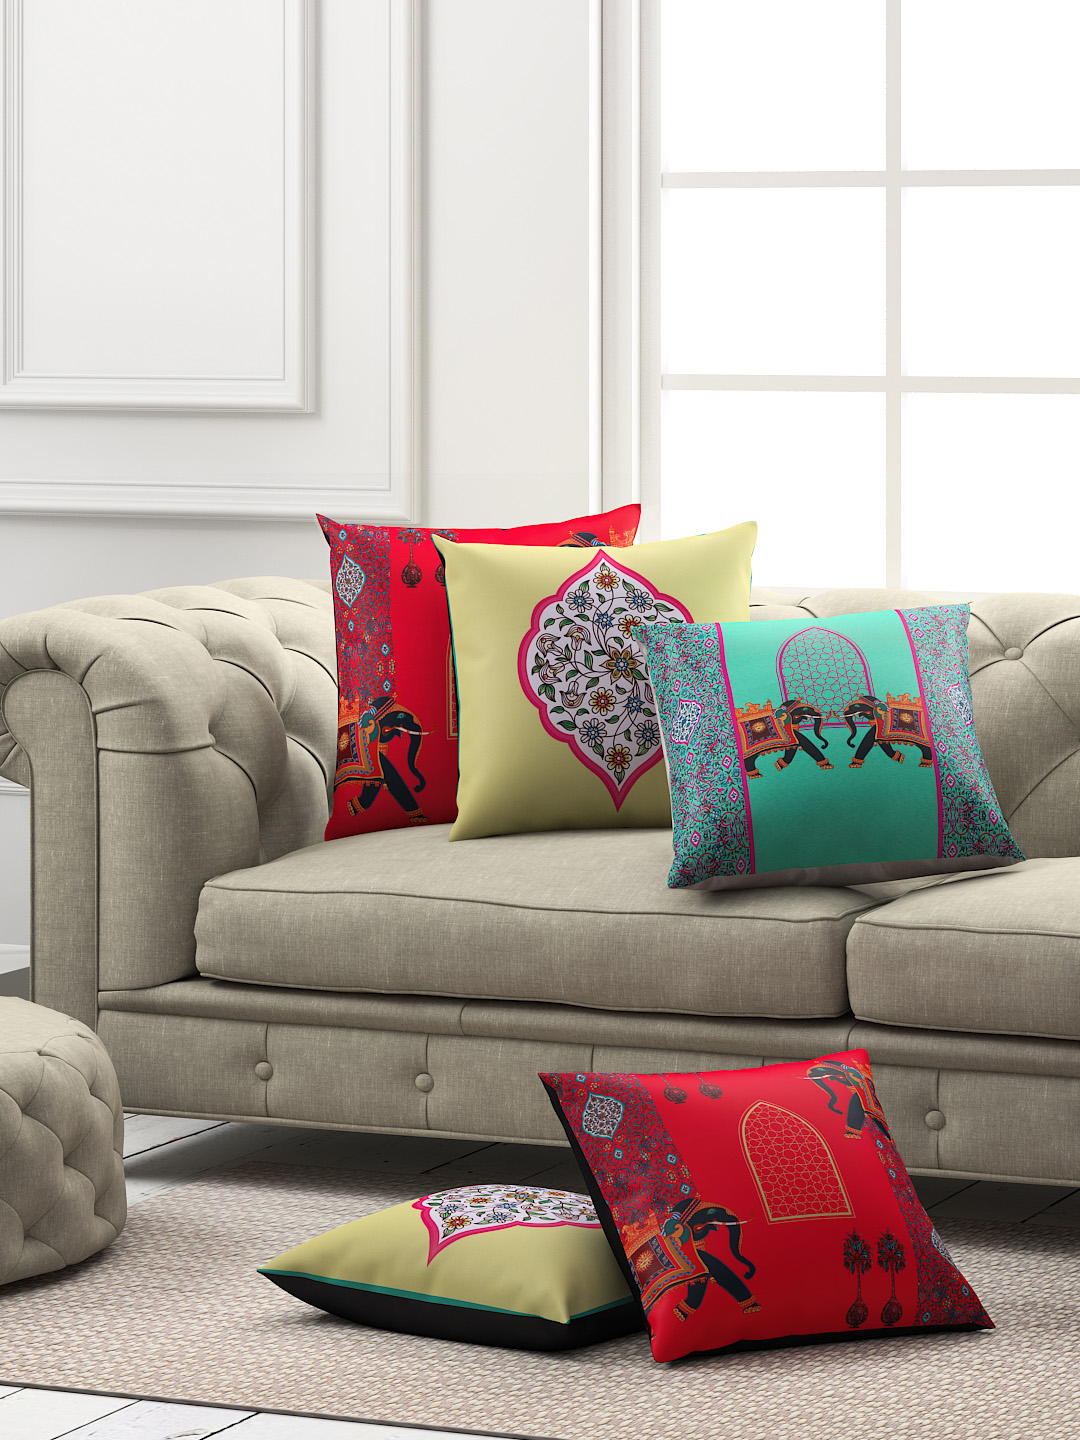 SEJ by Nisha Gupta Set of 5 Abstract Square Cushion Covers Price in India